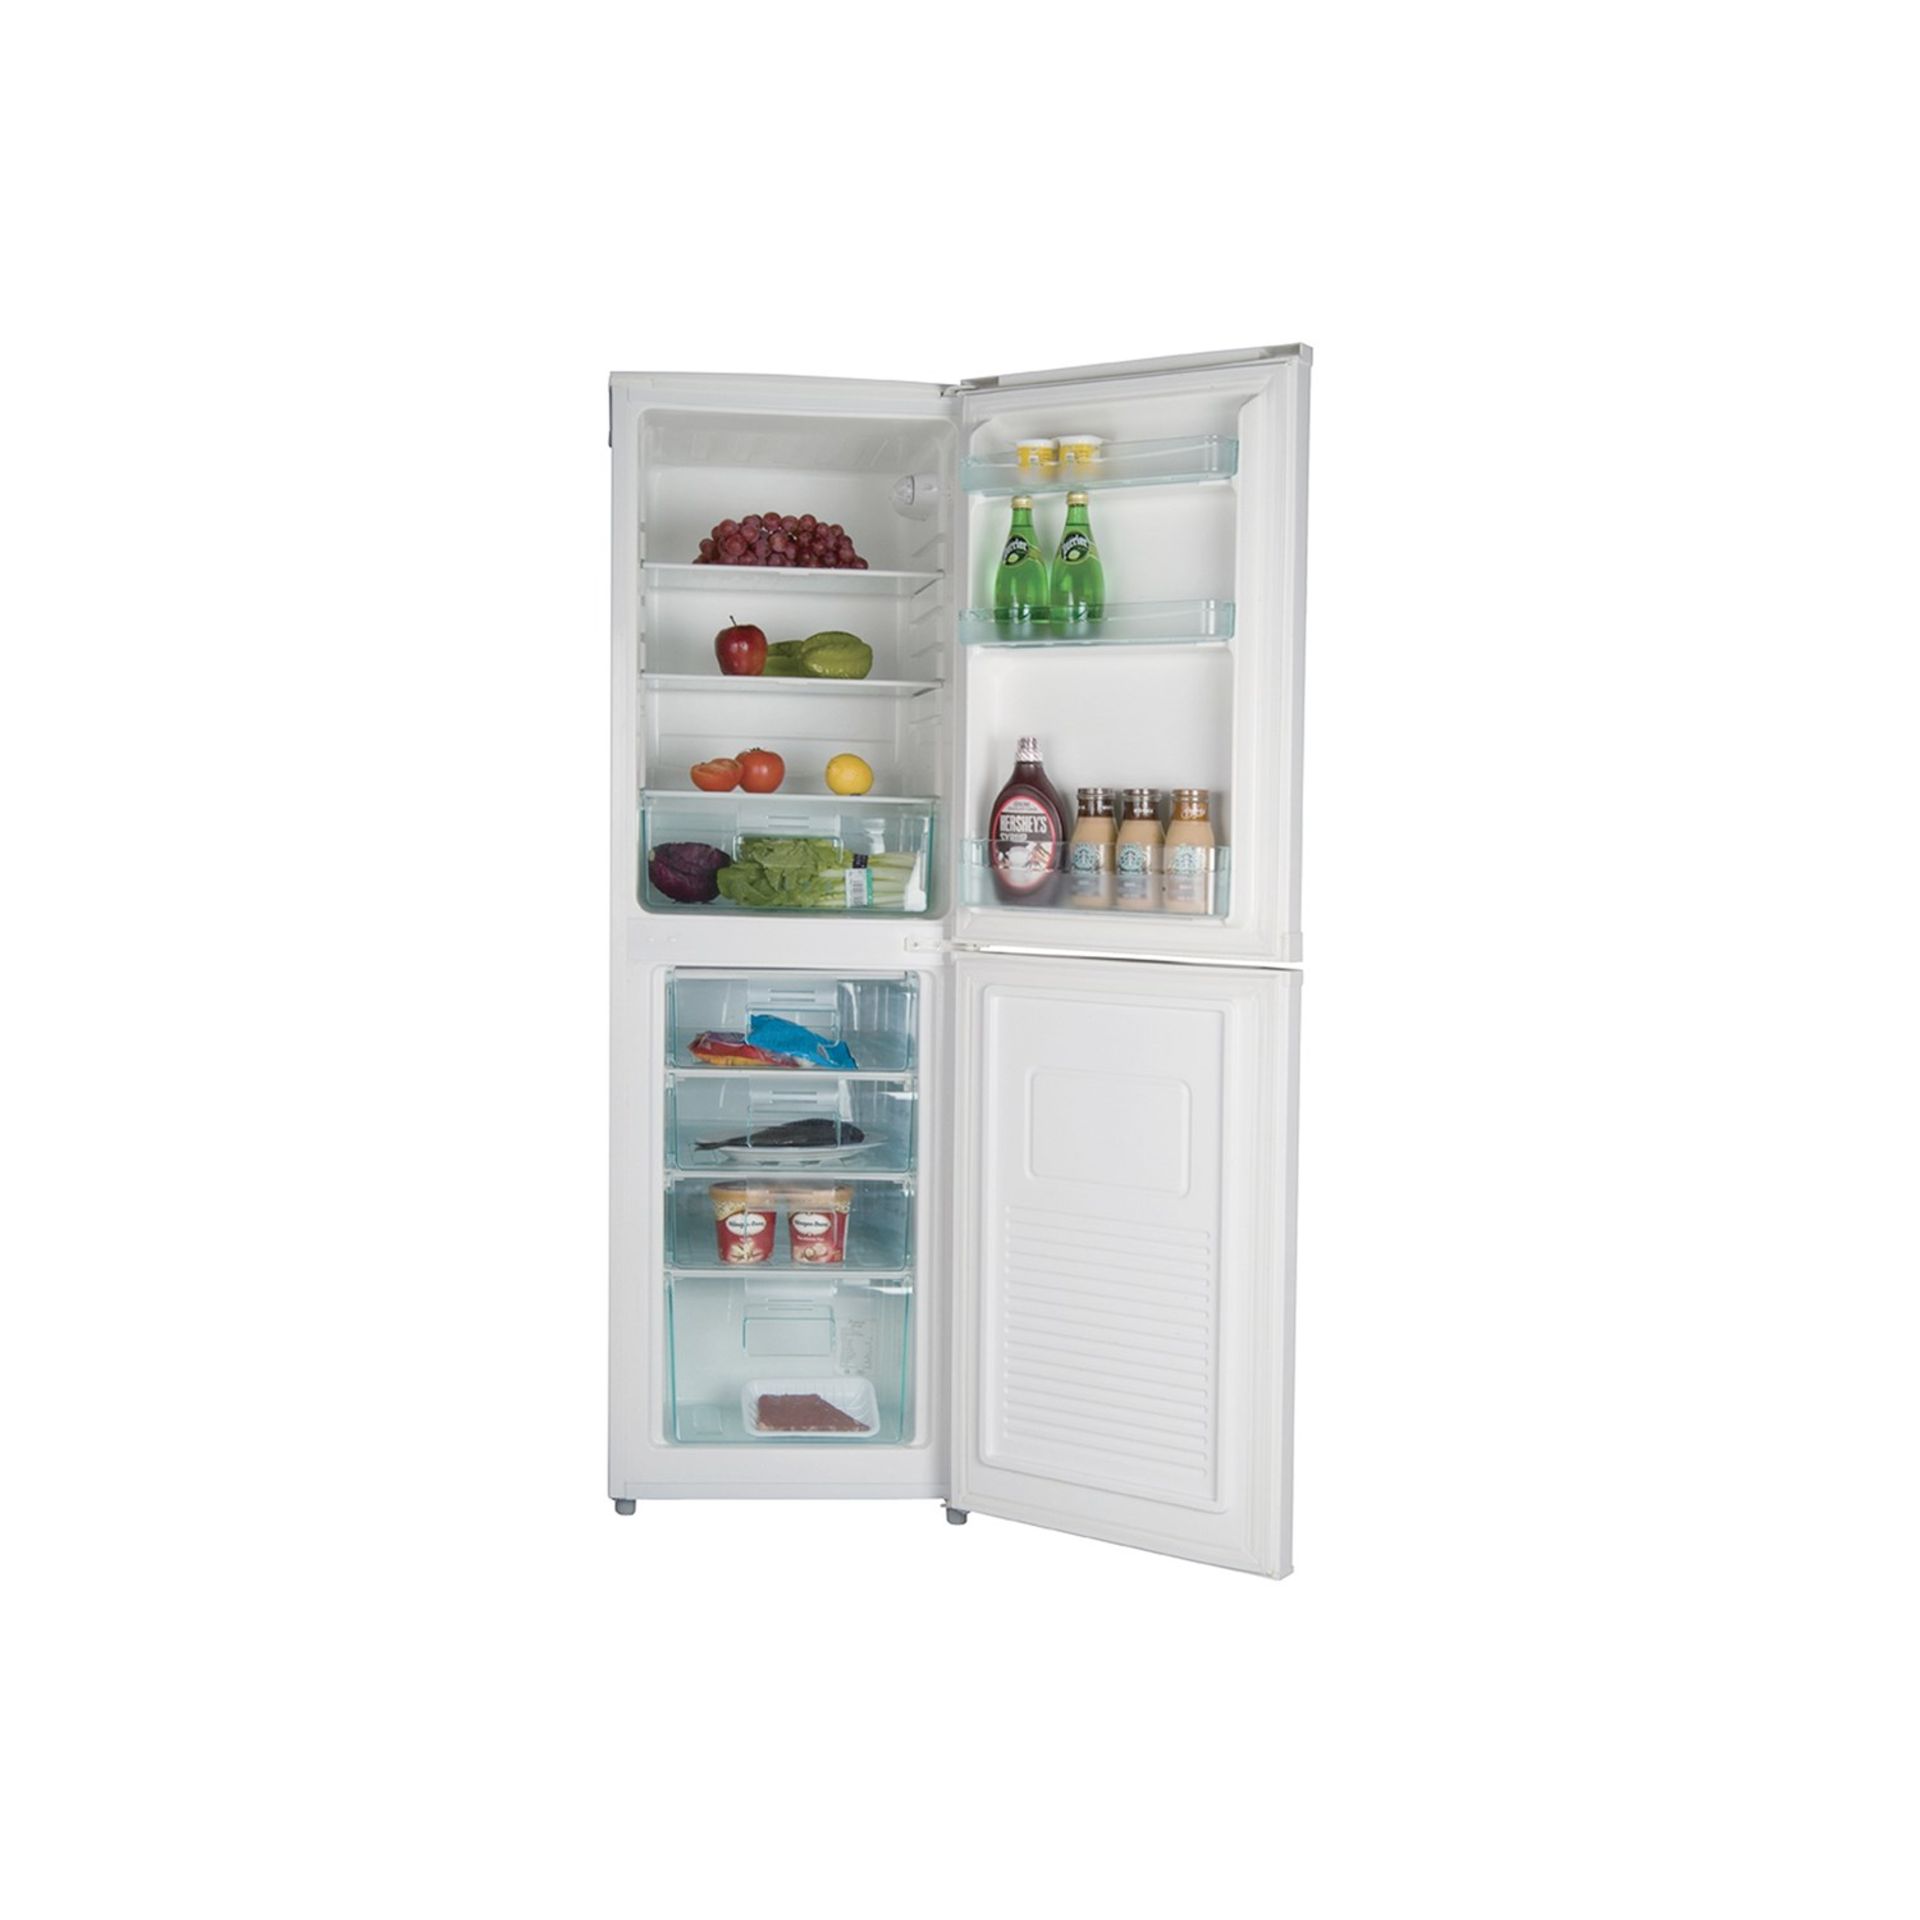 + VAT Brand New Amica FK198.4 Frost Free Fridge Freezer - A+ Energy Rated - Auto Defrosting